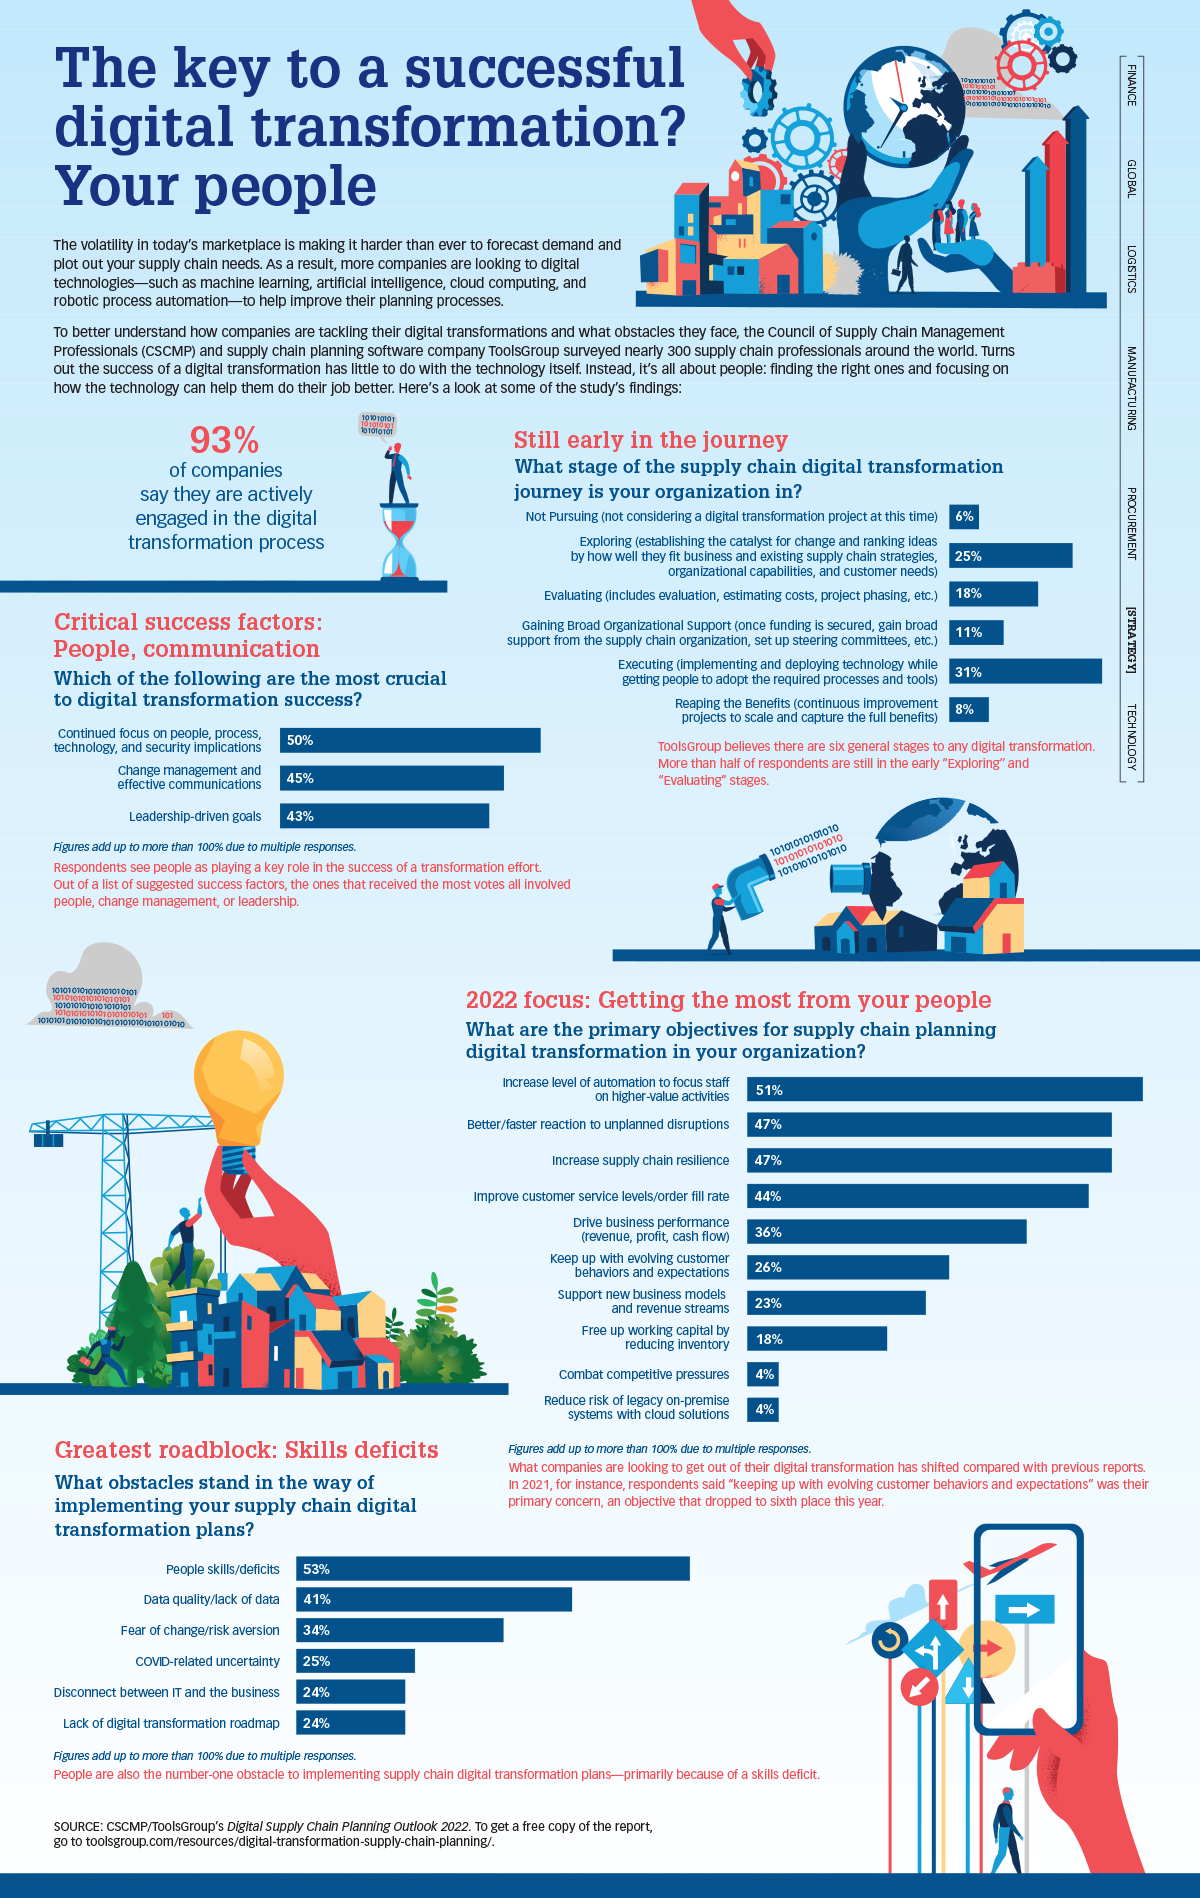 Infographic: CSCMP/Tools Group Digital Supply Chain Planning Outlook 2022